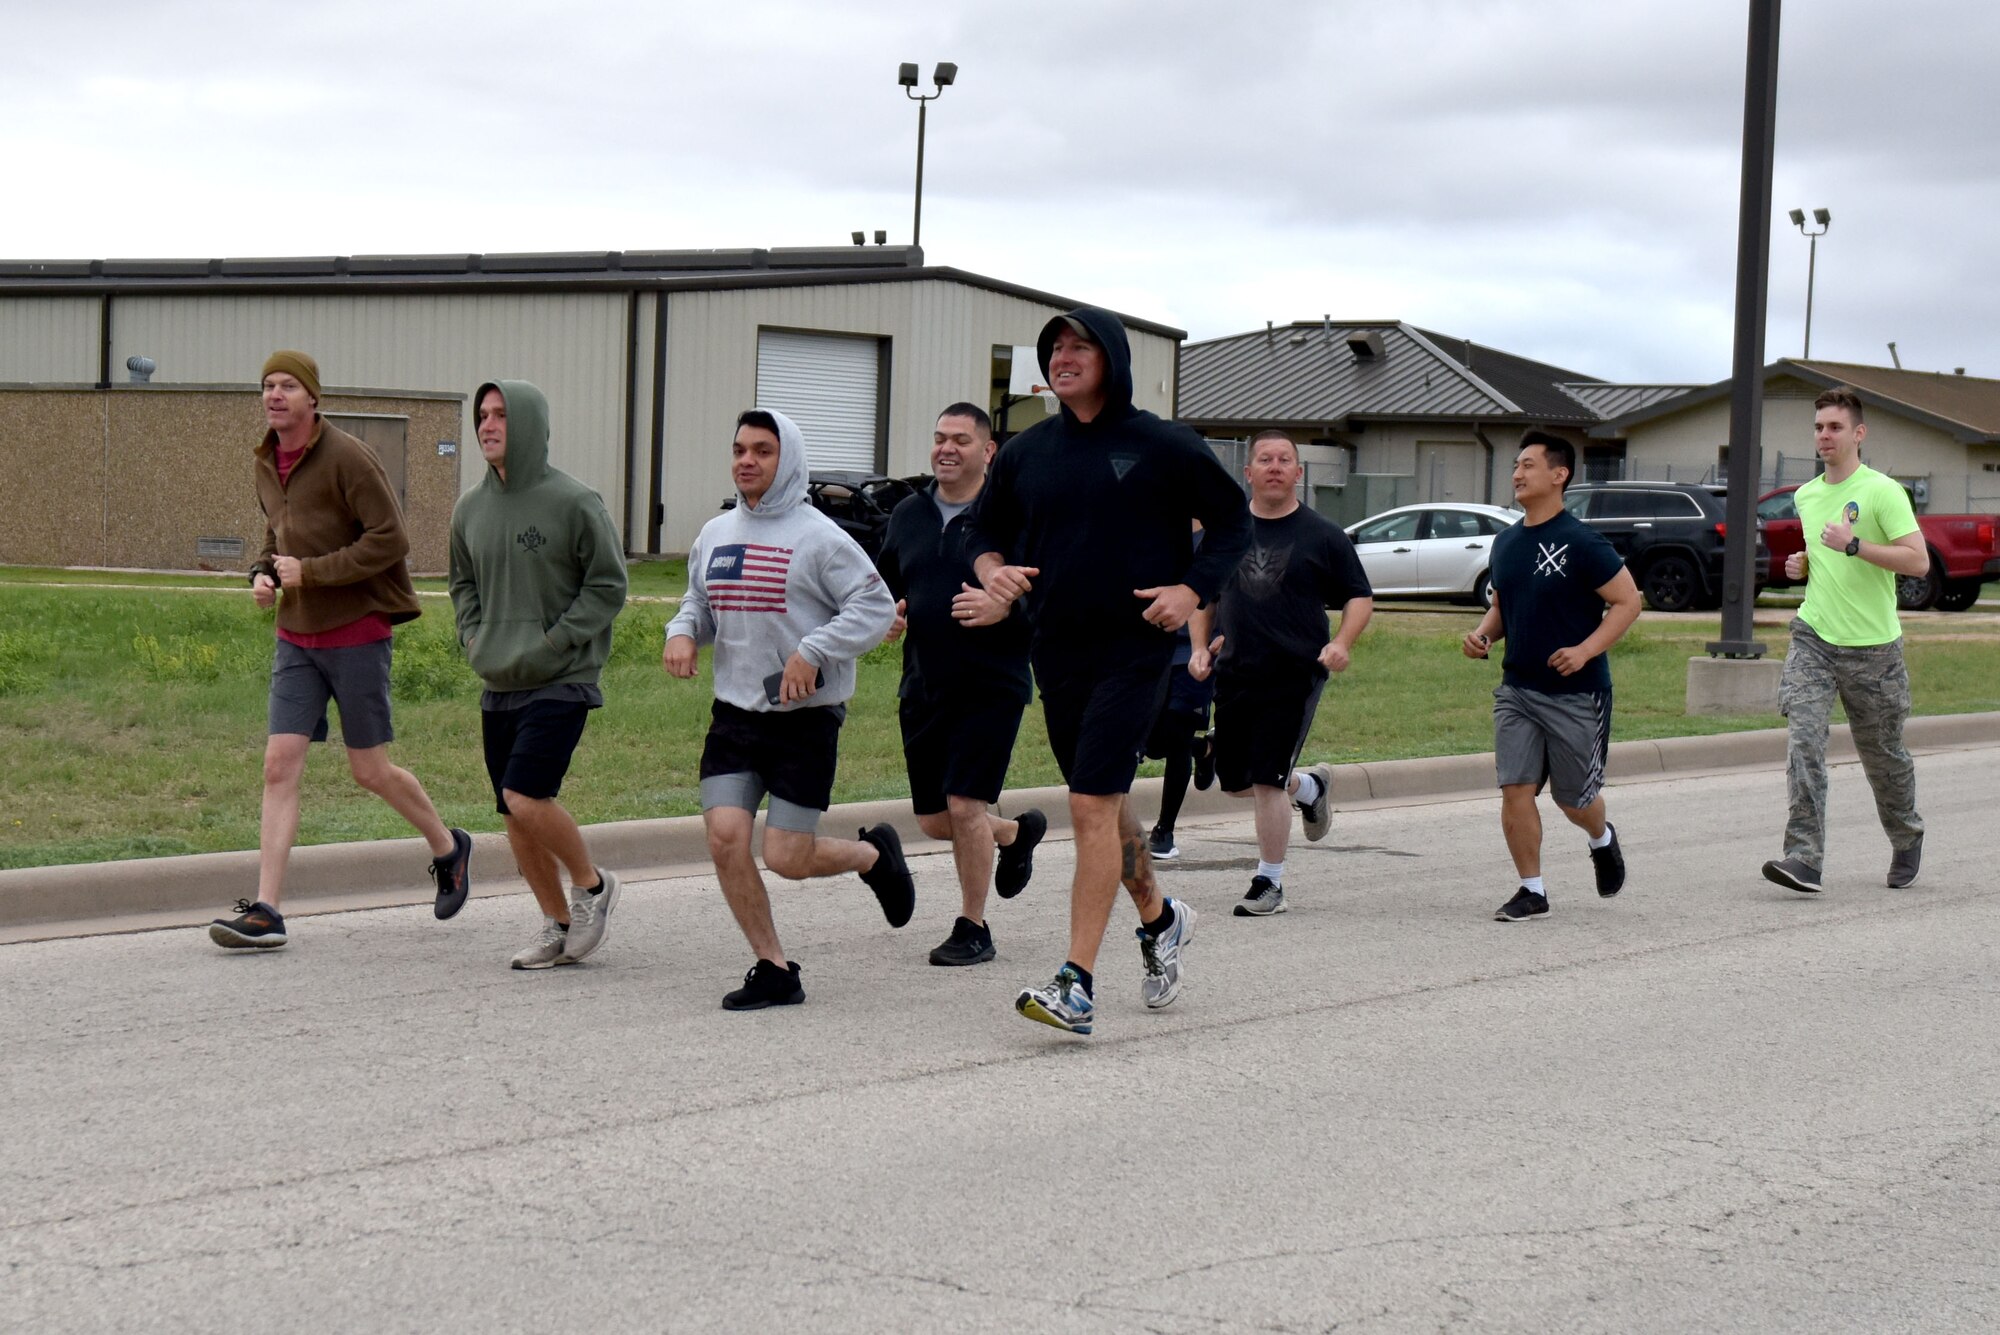 Goodfellow members start a four mile run and obstacle course on Goodfellow Air Force Base, Texas, May 12, 2021. The run and obstacle course was one of several events held on Goodfellow in honor of National Police Week. (U.S. Air Force photo by Staff Sgt. Seraiah Wolf)